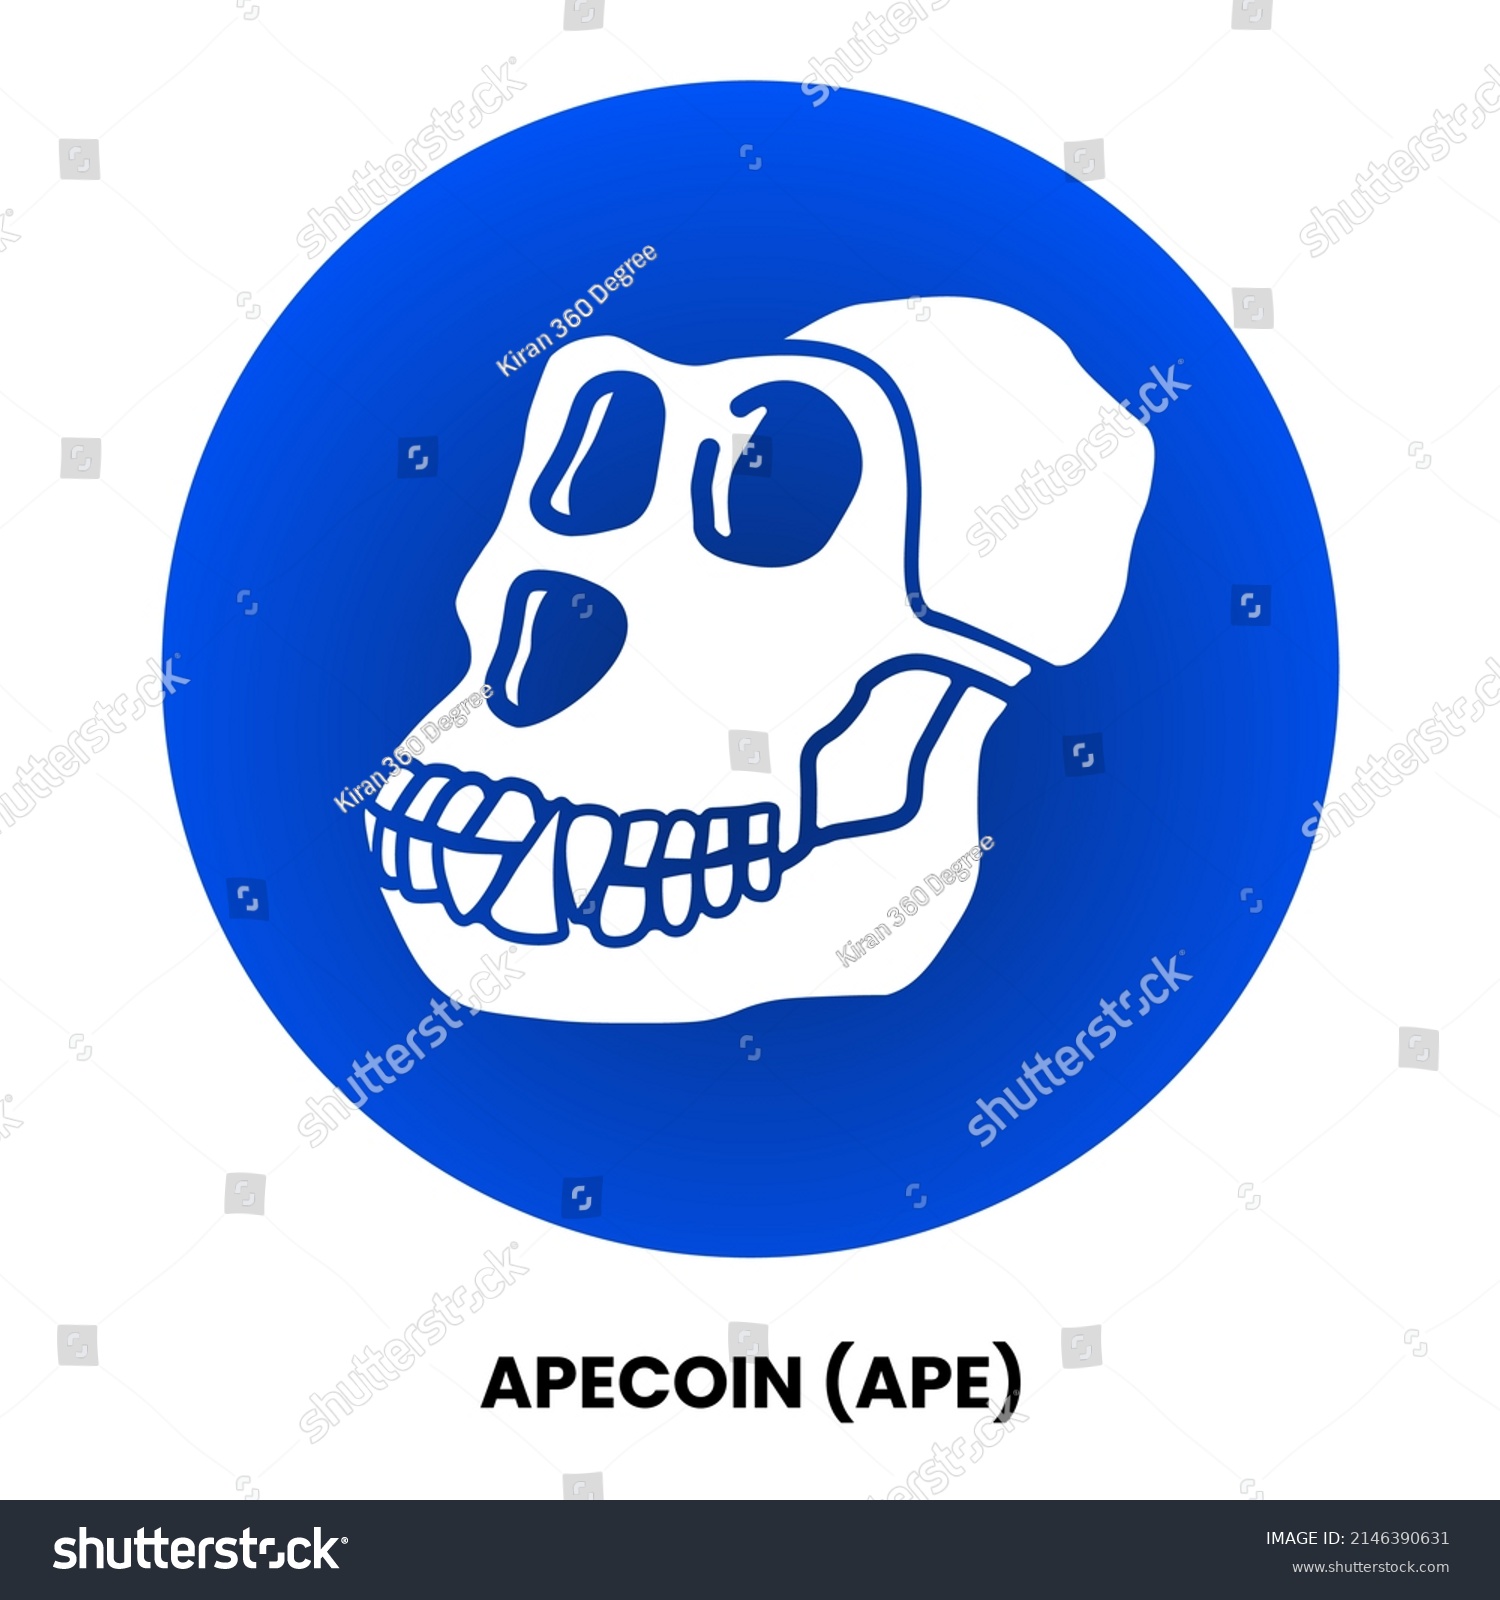 SVG of Apecoin crypto currency with symbol APE. Crypto logo vector illustration for stickers, icon, badges, labels and emblem designs. svg